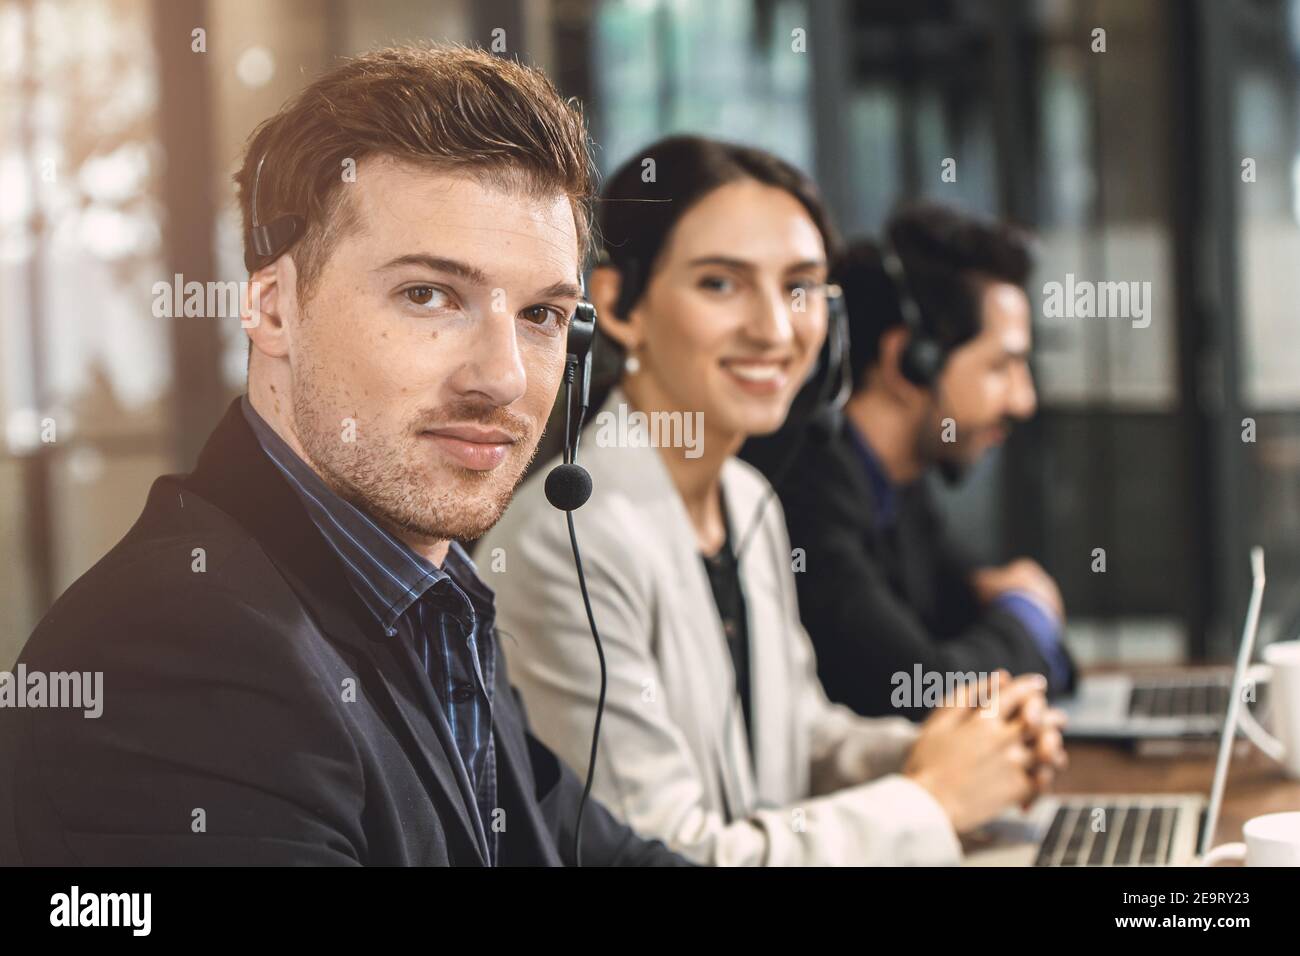 Operator teamwork happy smile, Business call center help desk service team working in office. Stock Photo